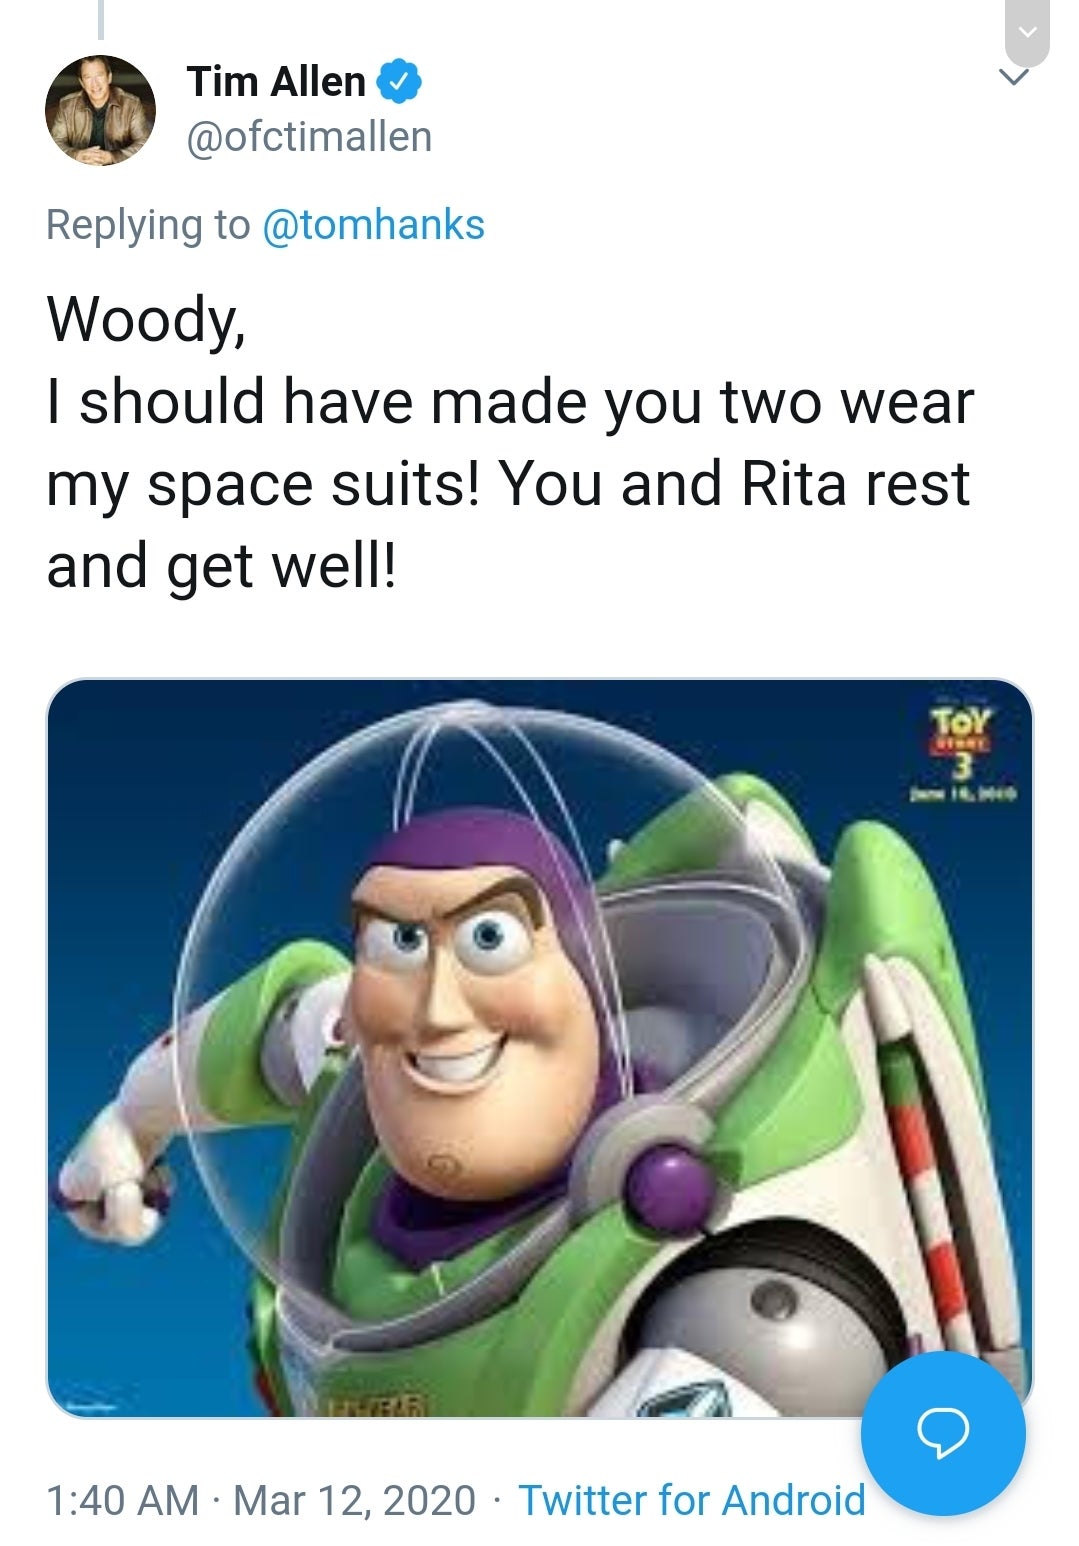 tom hanks, coronavirus memes, toy story 3 - Tim Allen Woody, I should have made you two wear my space suits! You and Rita rest and get well! wie Twitter for Android